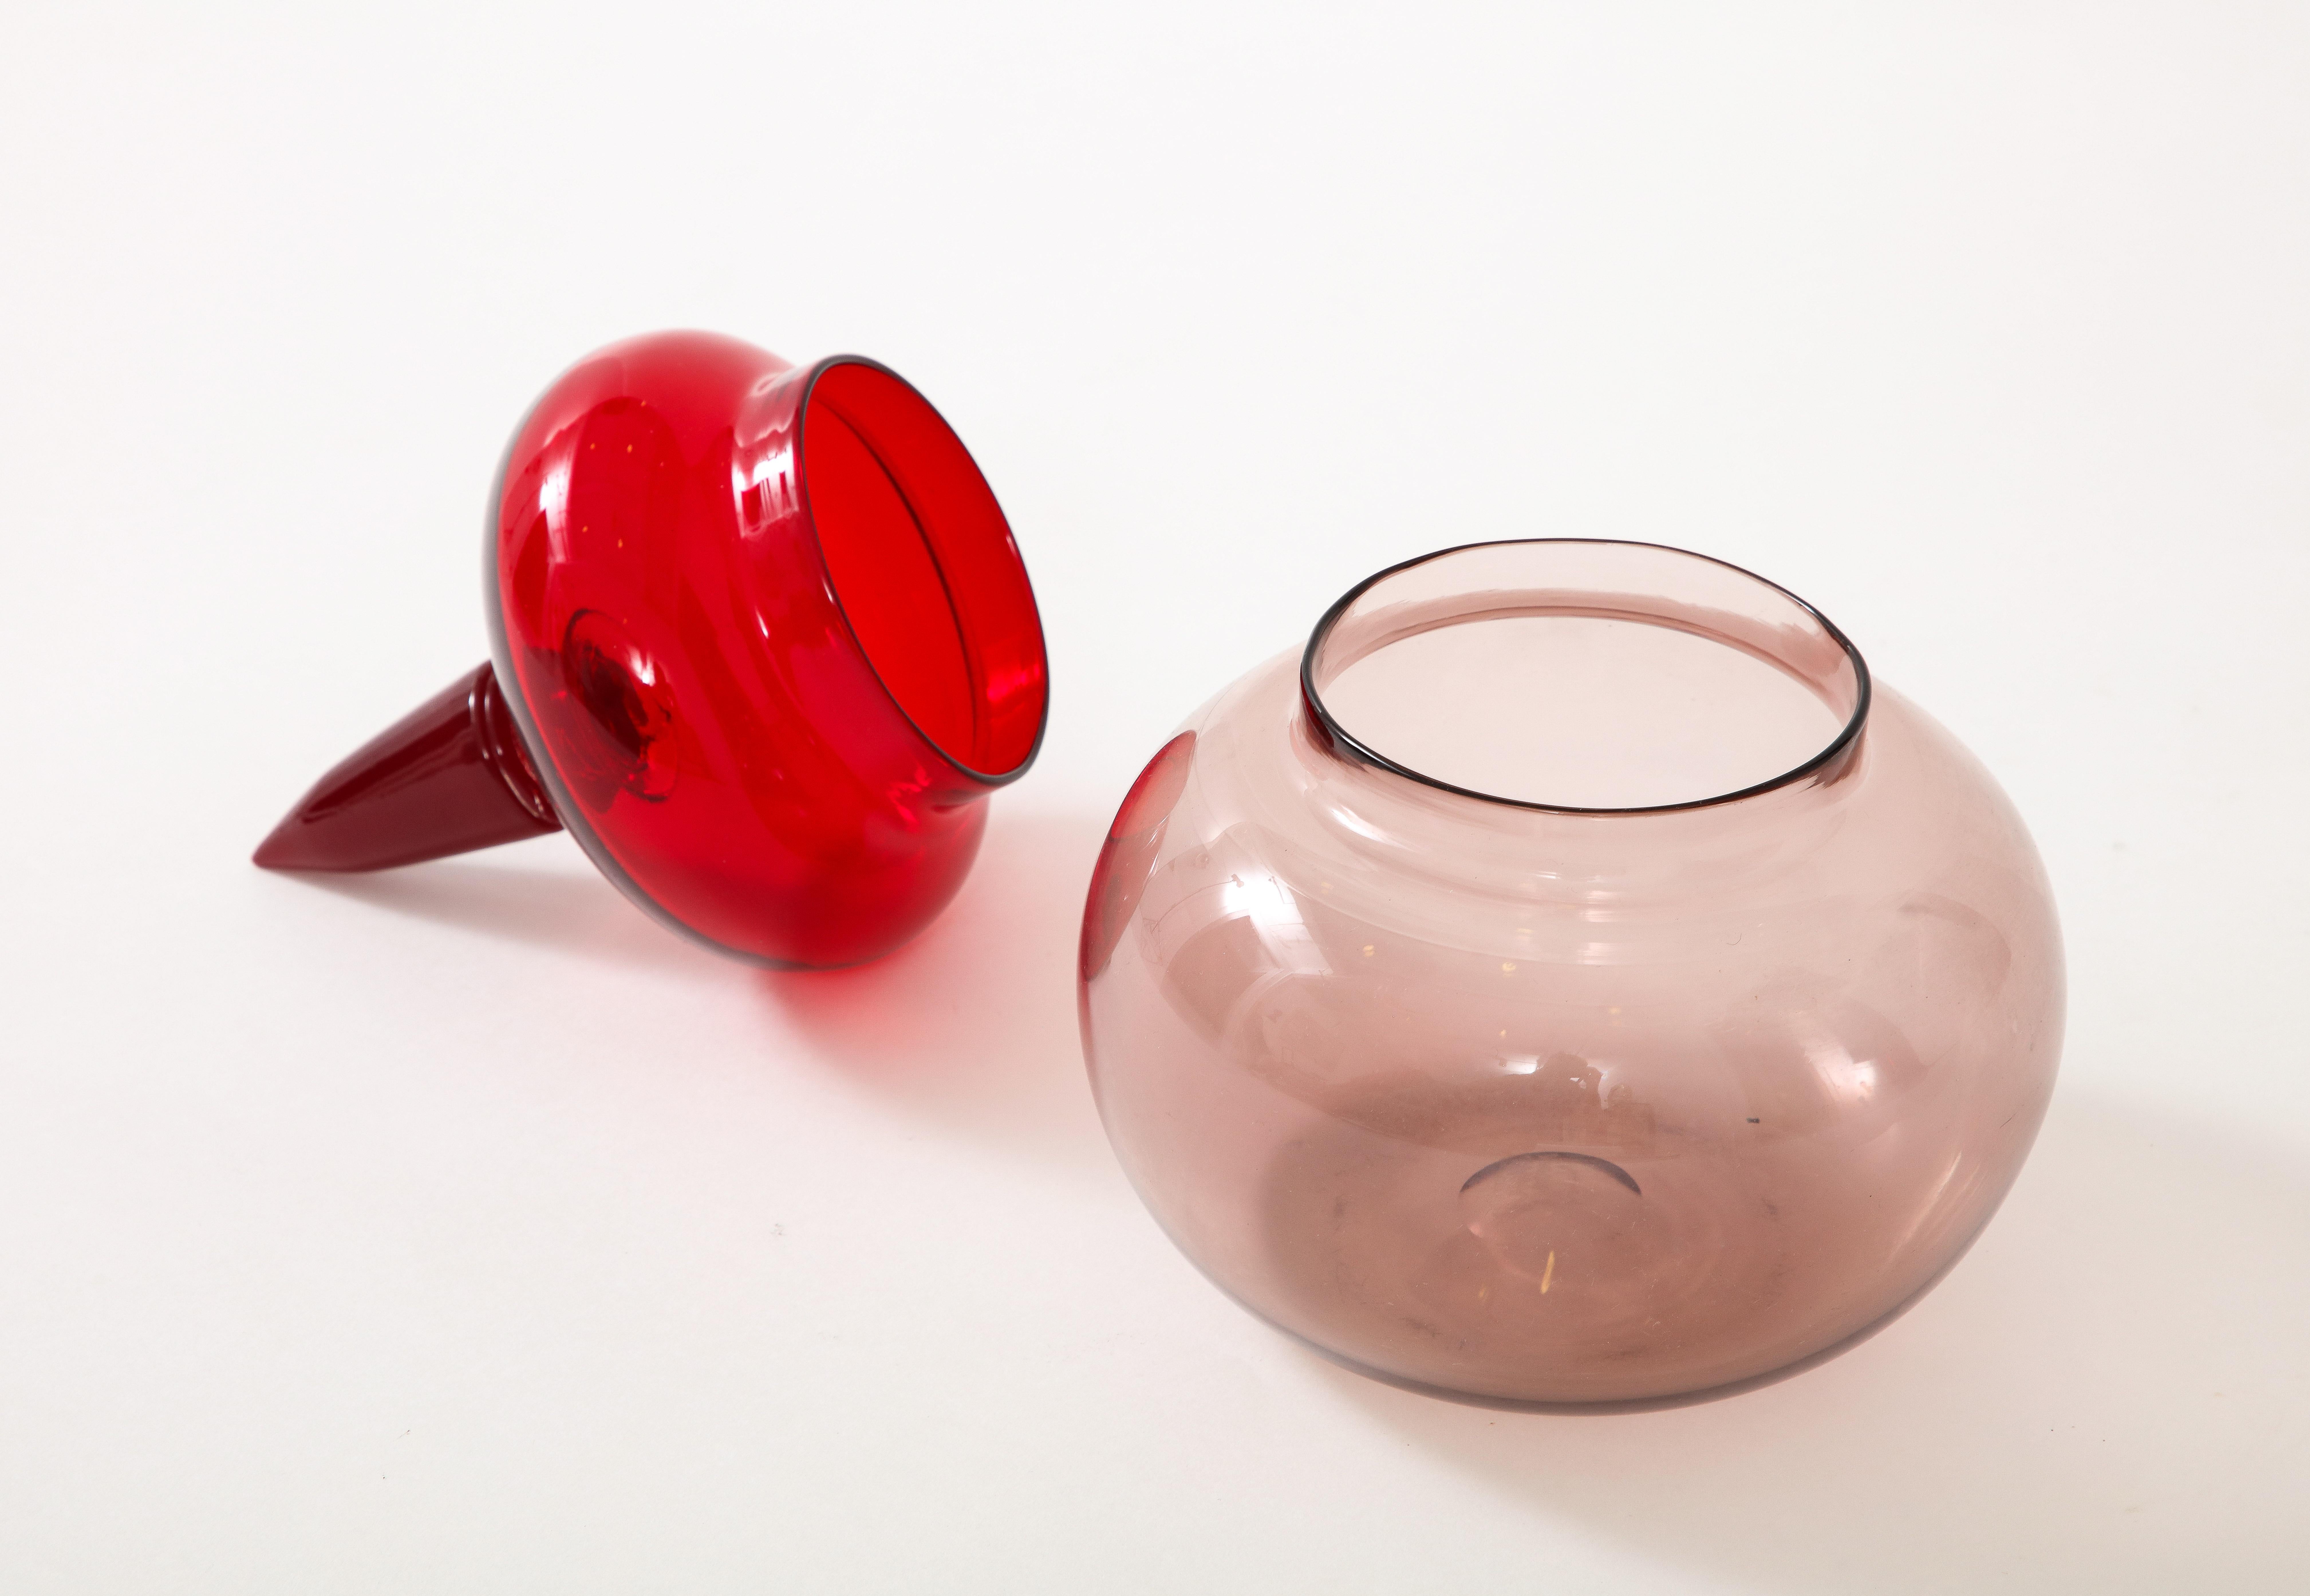 Paolo Venini Rare Apothecary Jar Model 4742 in Red and Mauve Glass, Italy, 1959 In Good Condition For Sale In New York, NY